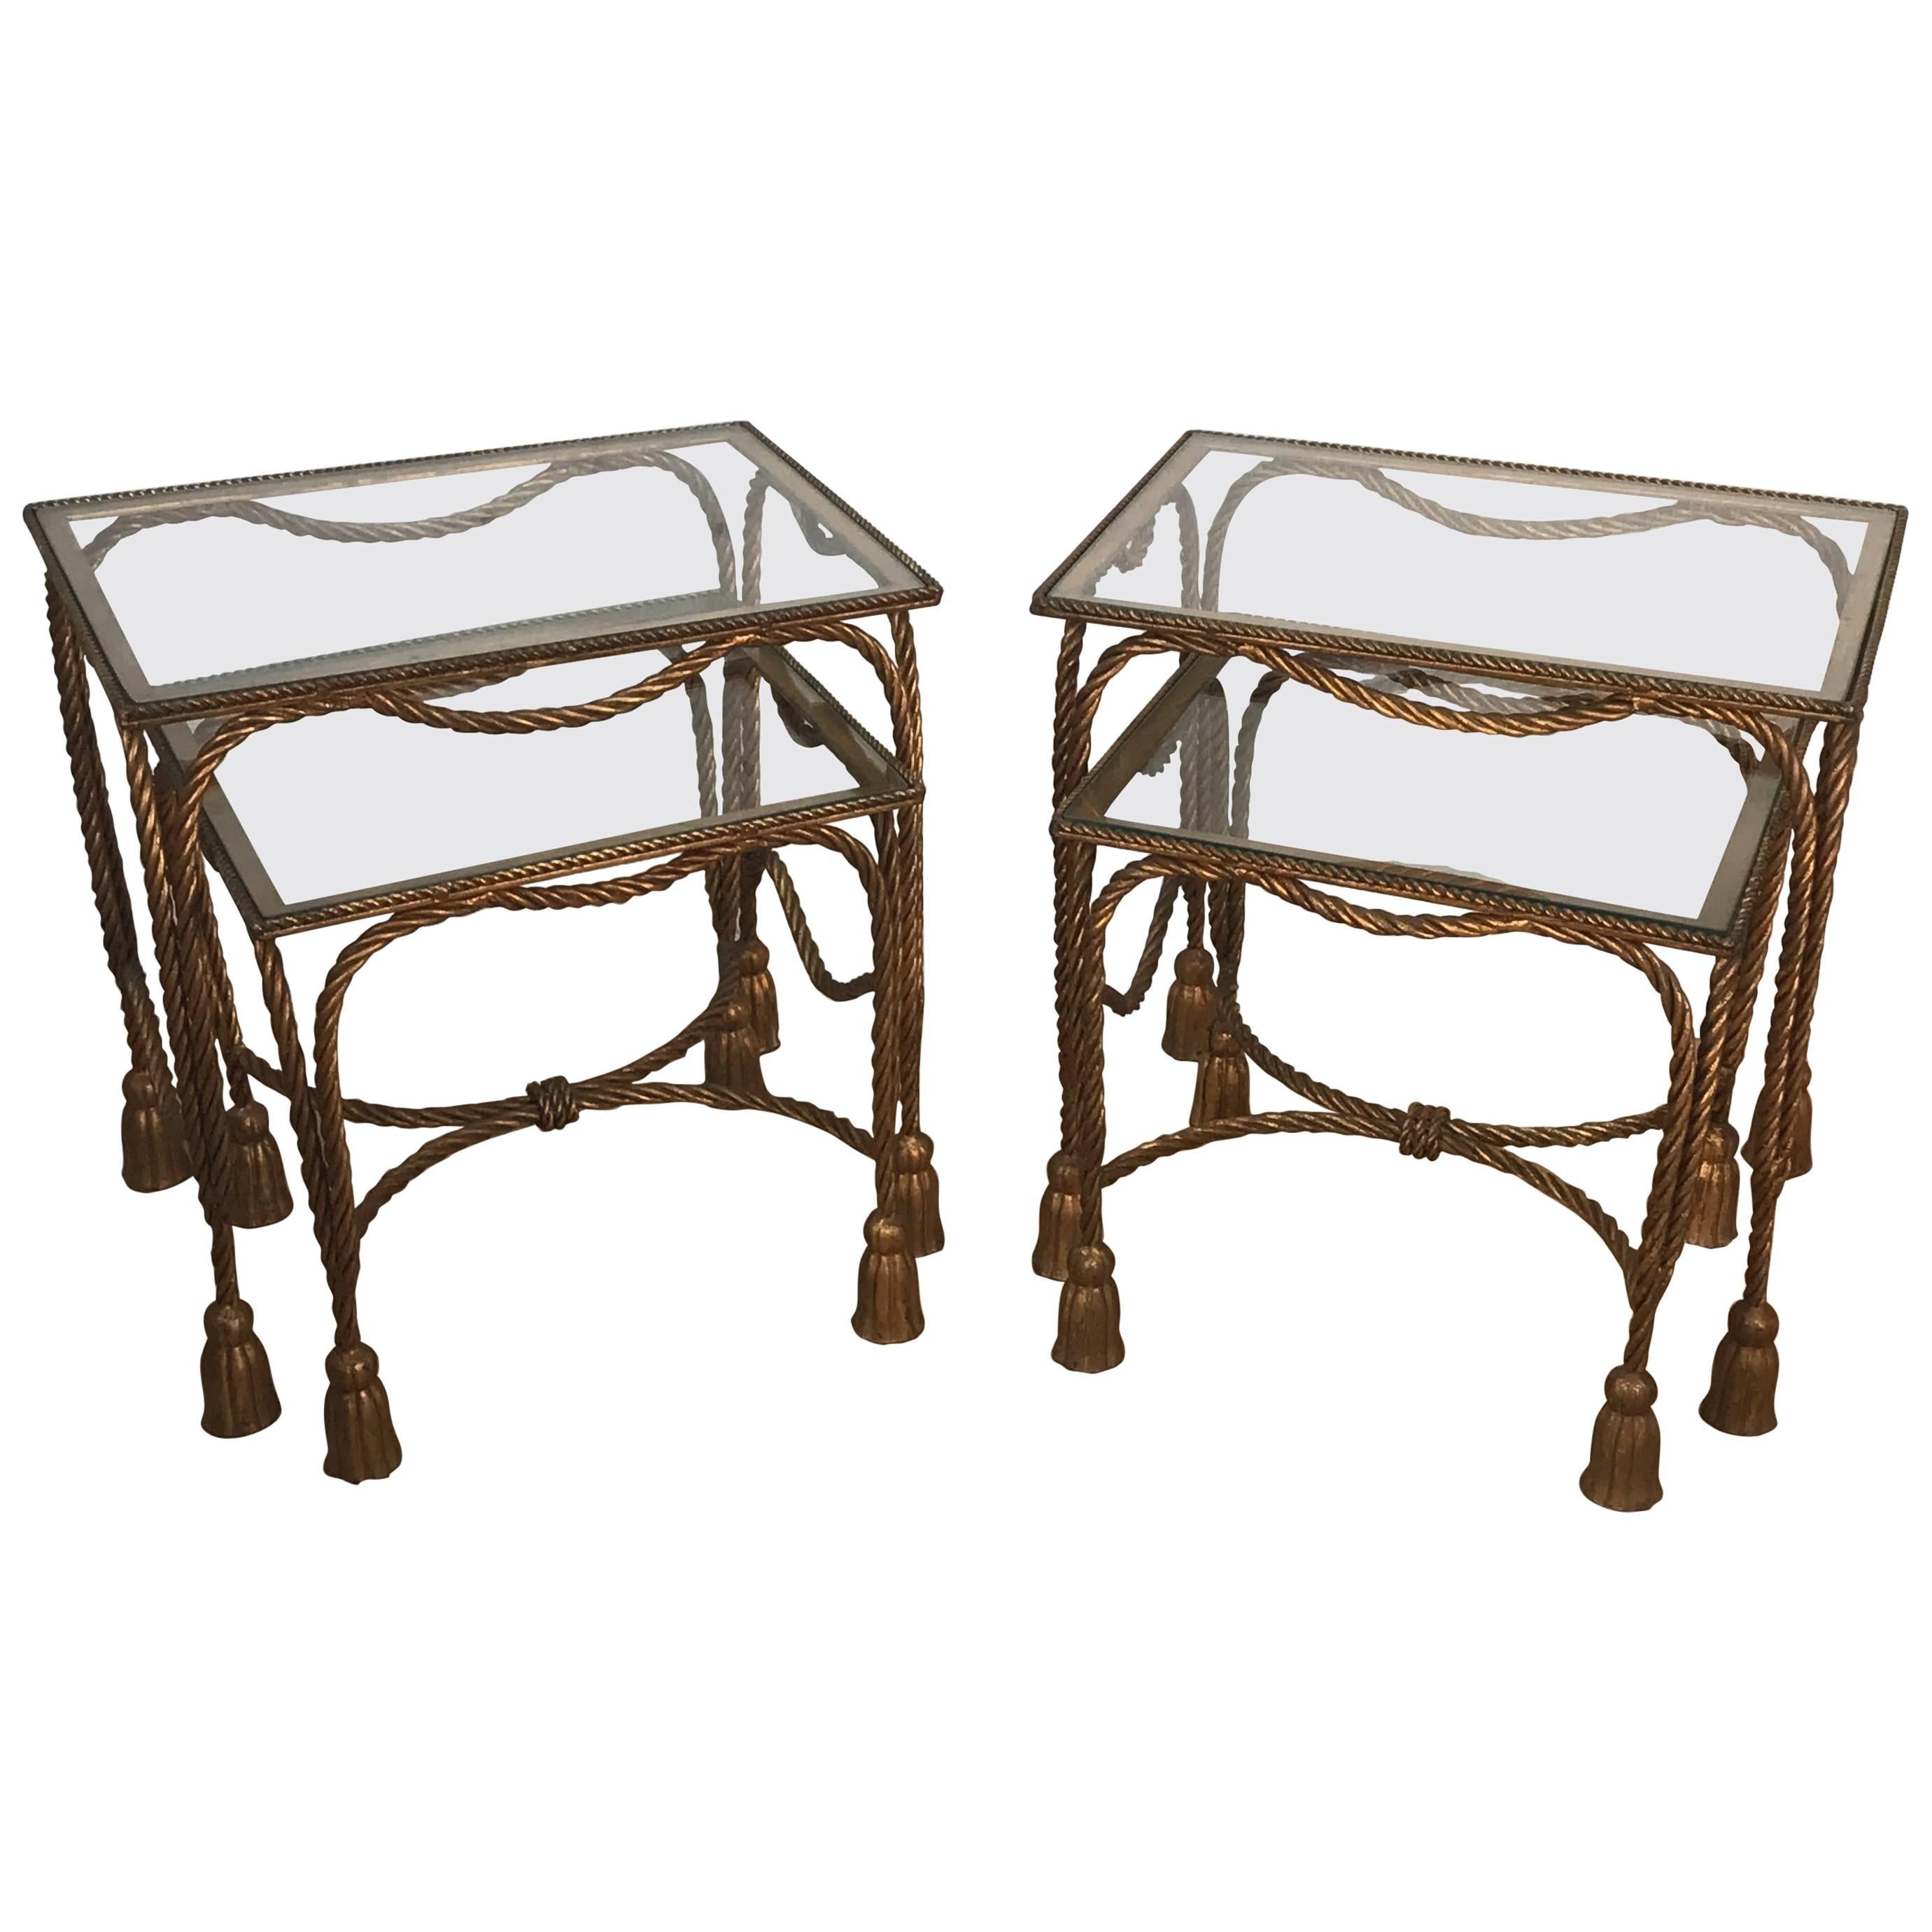 Two Pairs of Hollywood Regency Gilt Metal Rope Nesting Tables